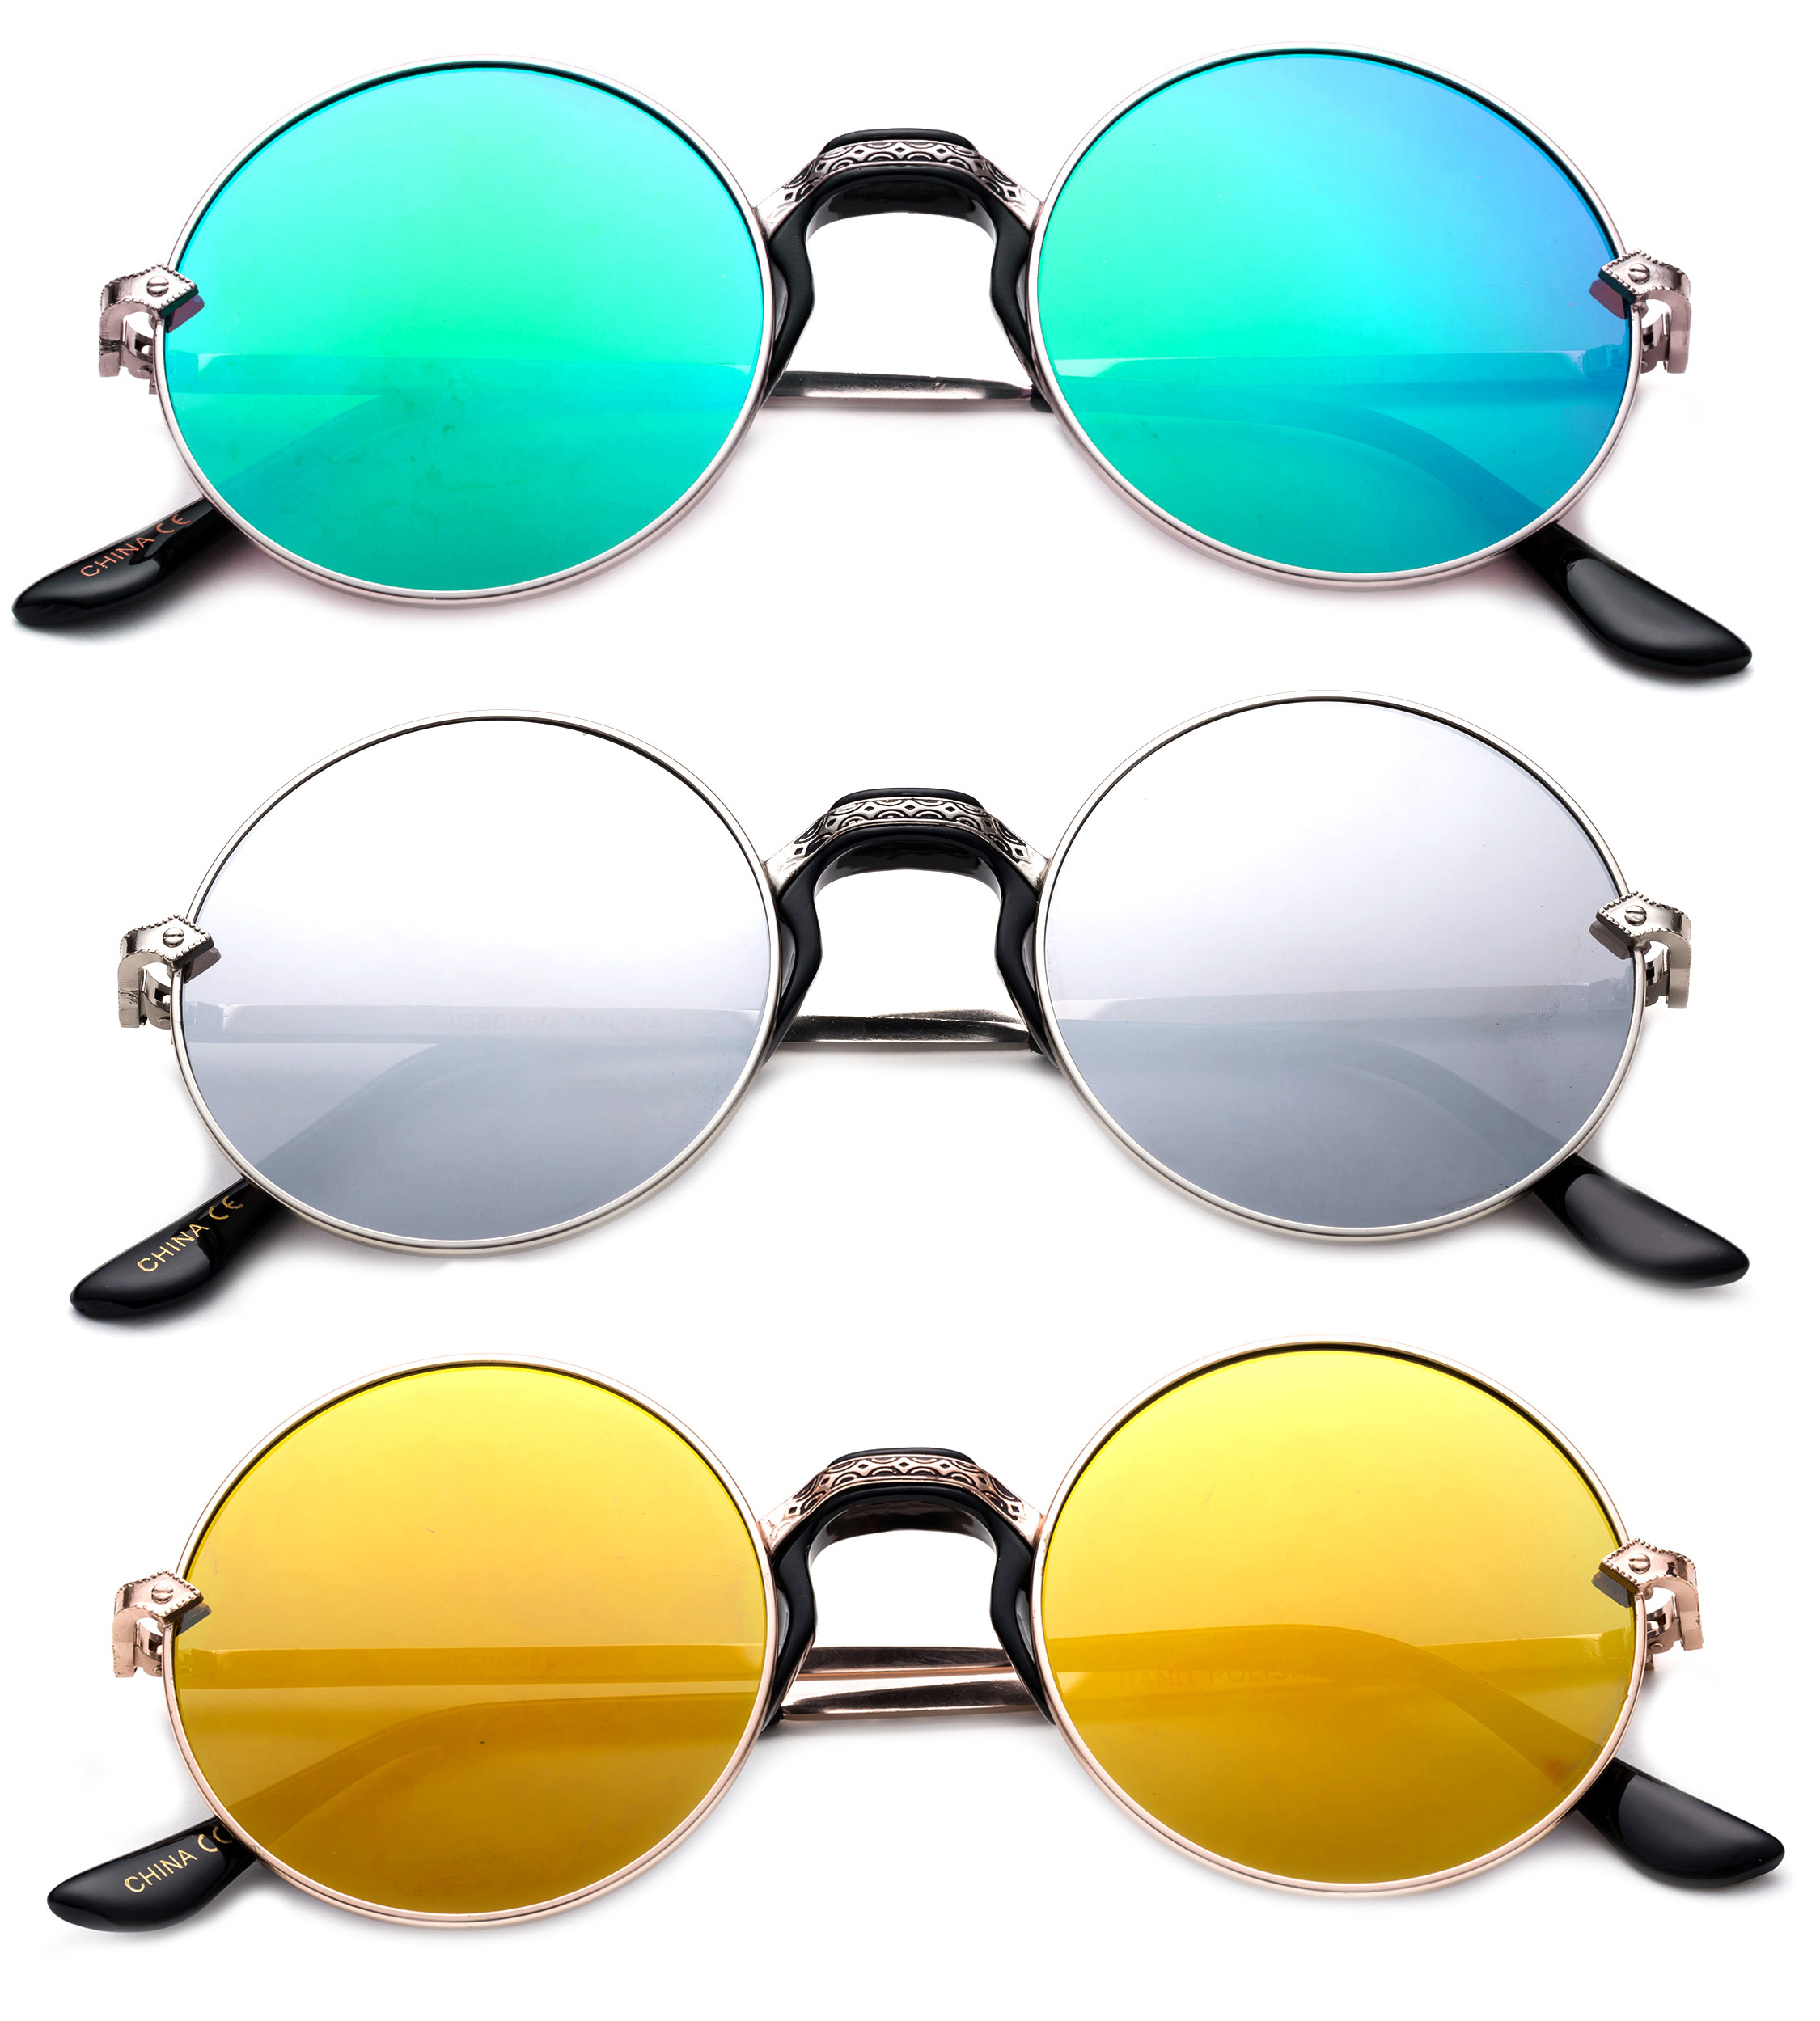 3 Pack Round Metal Frame Comfort Plastic Nose Bridge Fashion Sunglasses for Women for Men, Green, Yellow & Mirror - image 1 of 2